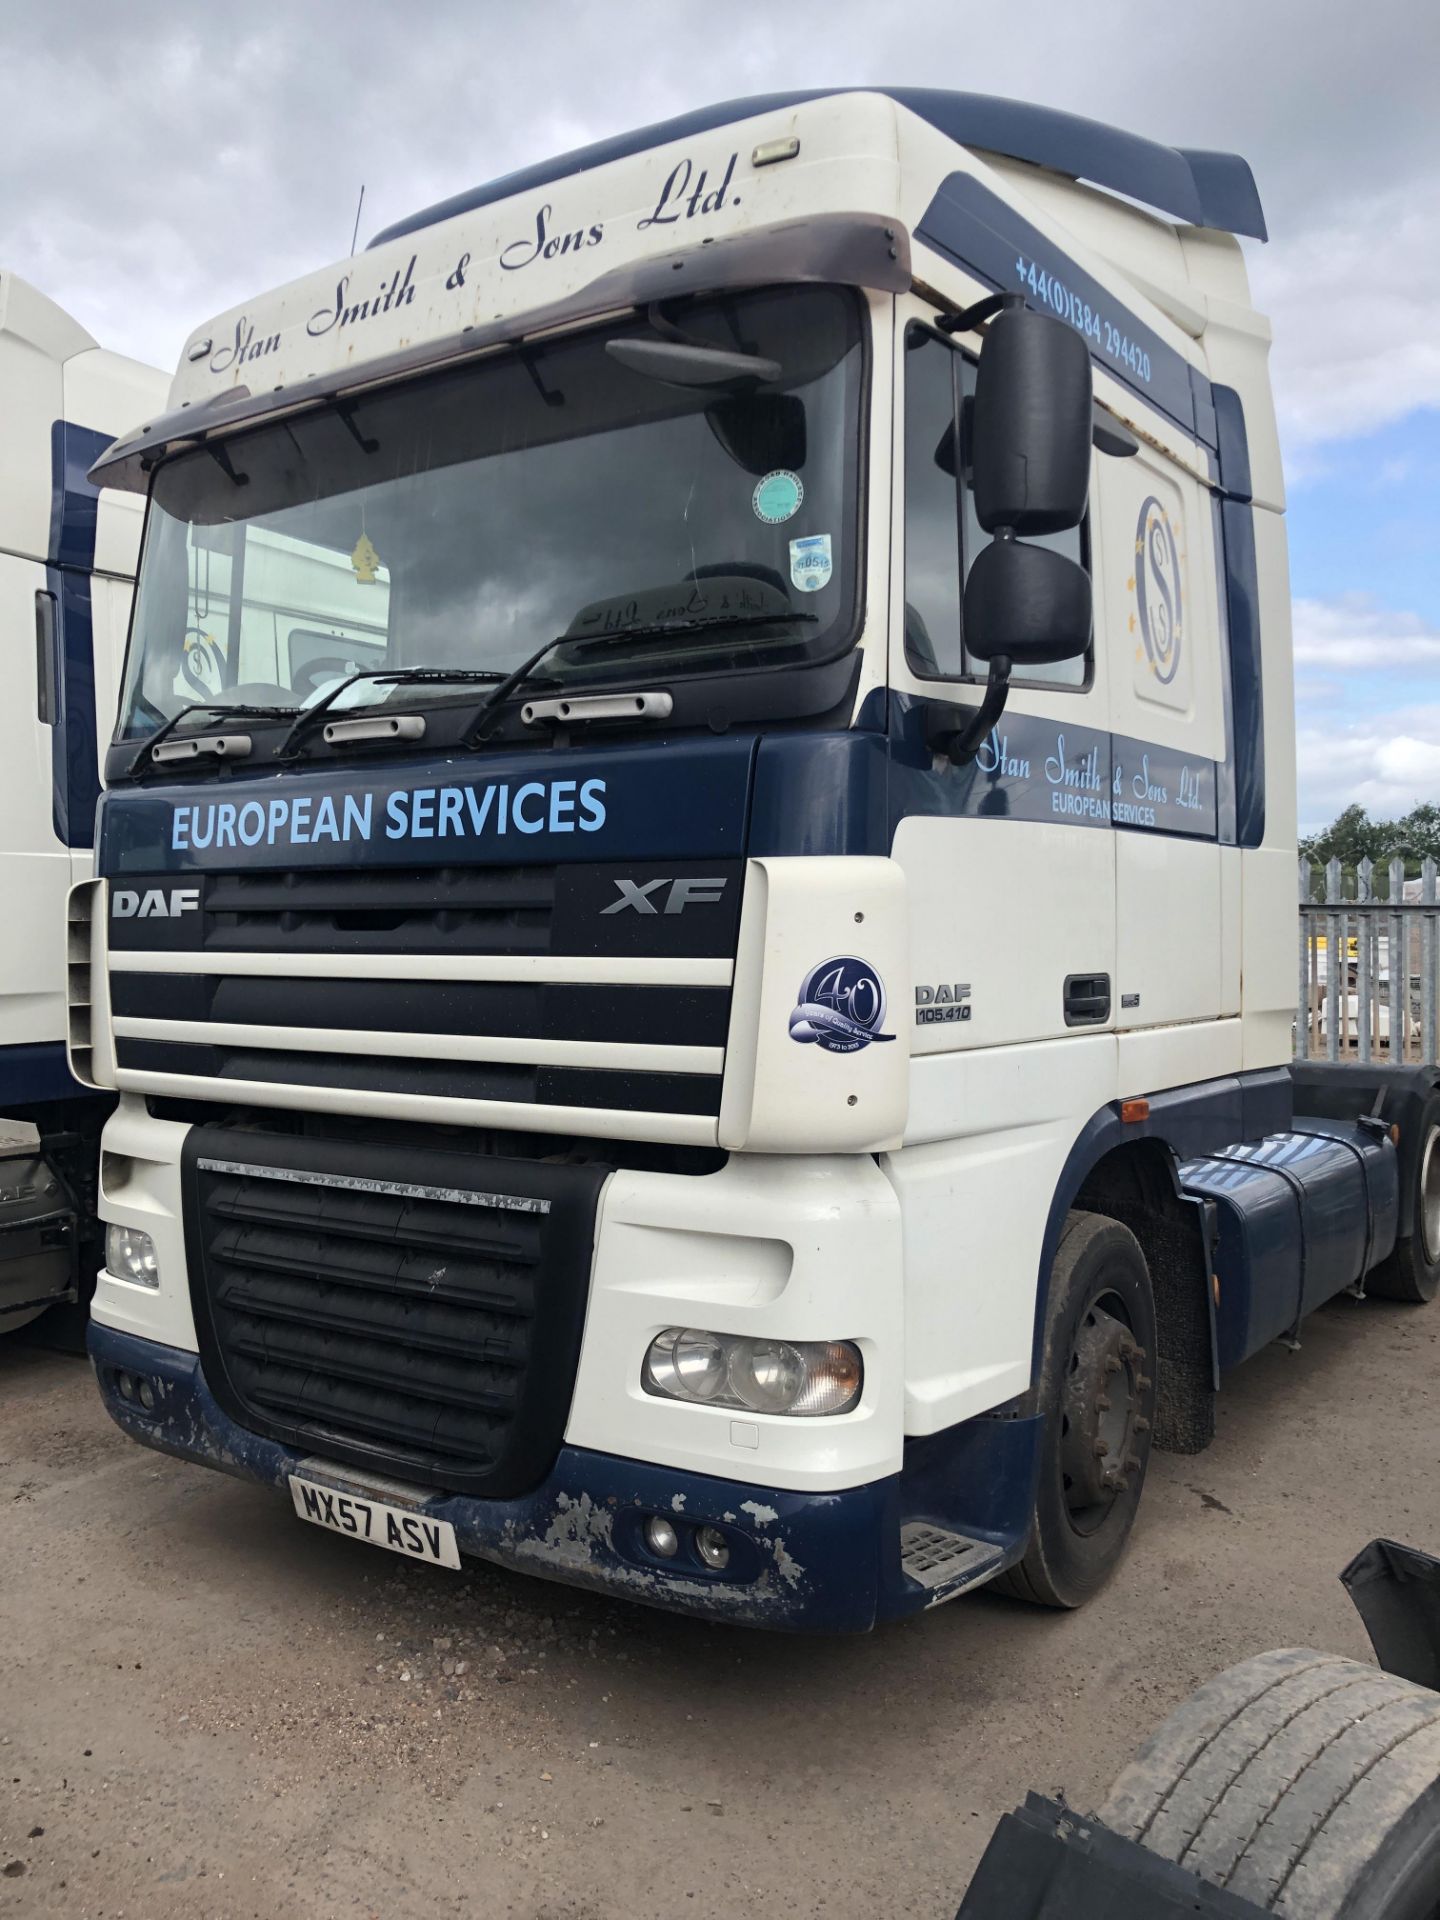 DAF FT 105 XF 410 LD SP Euro 5, 4 x 2 Space Cab Tractor Unit , Recorded Usage 661,131 KM, - Image 3 of 33